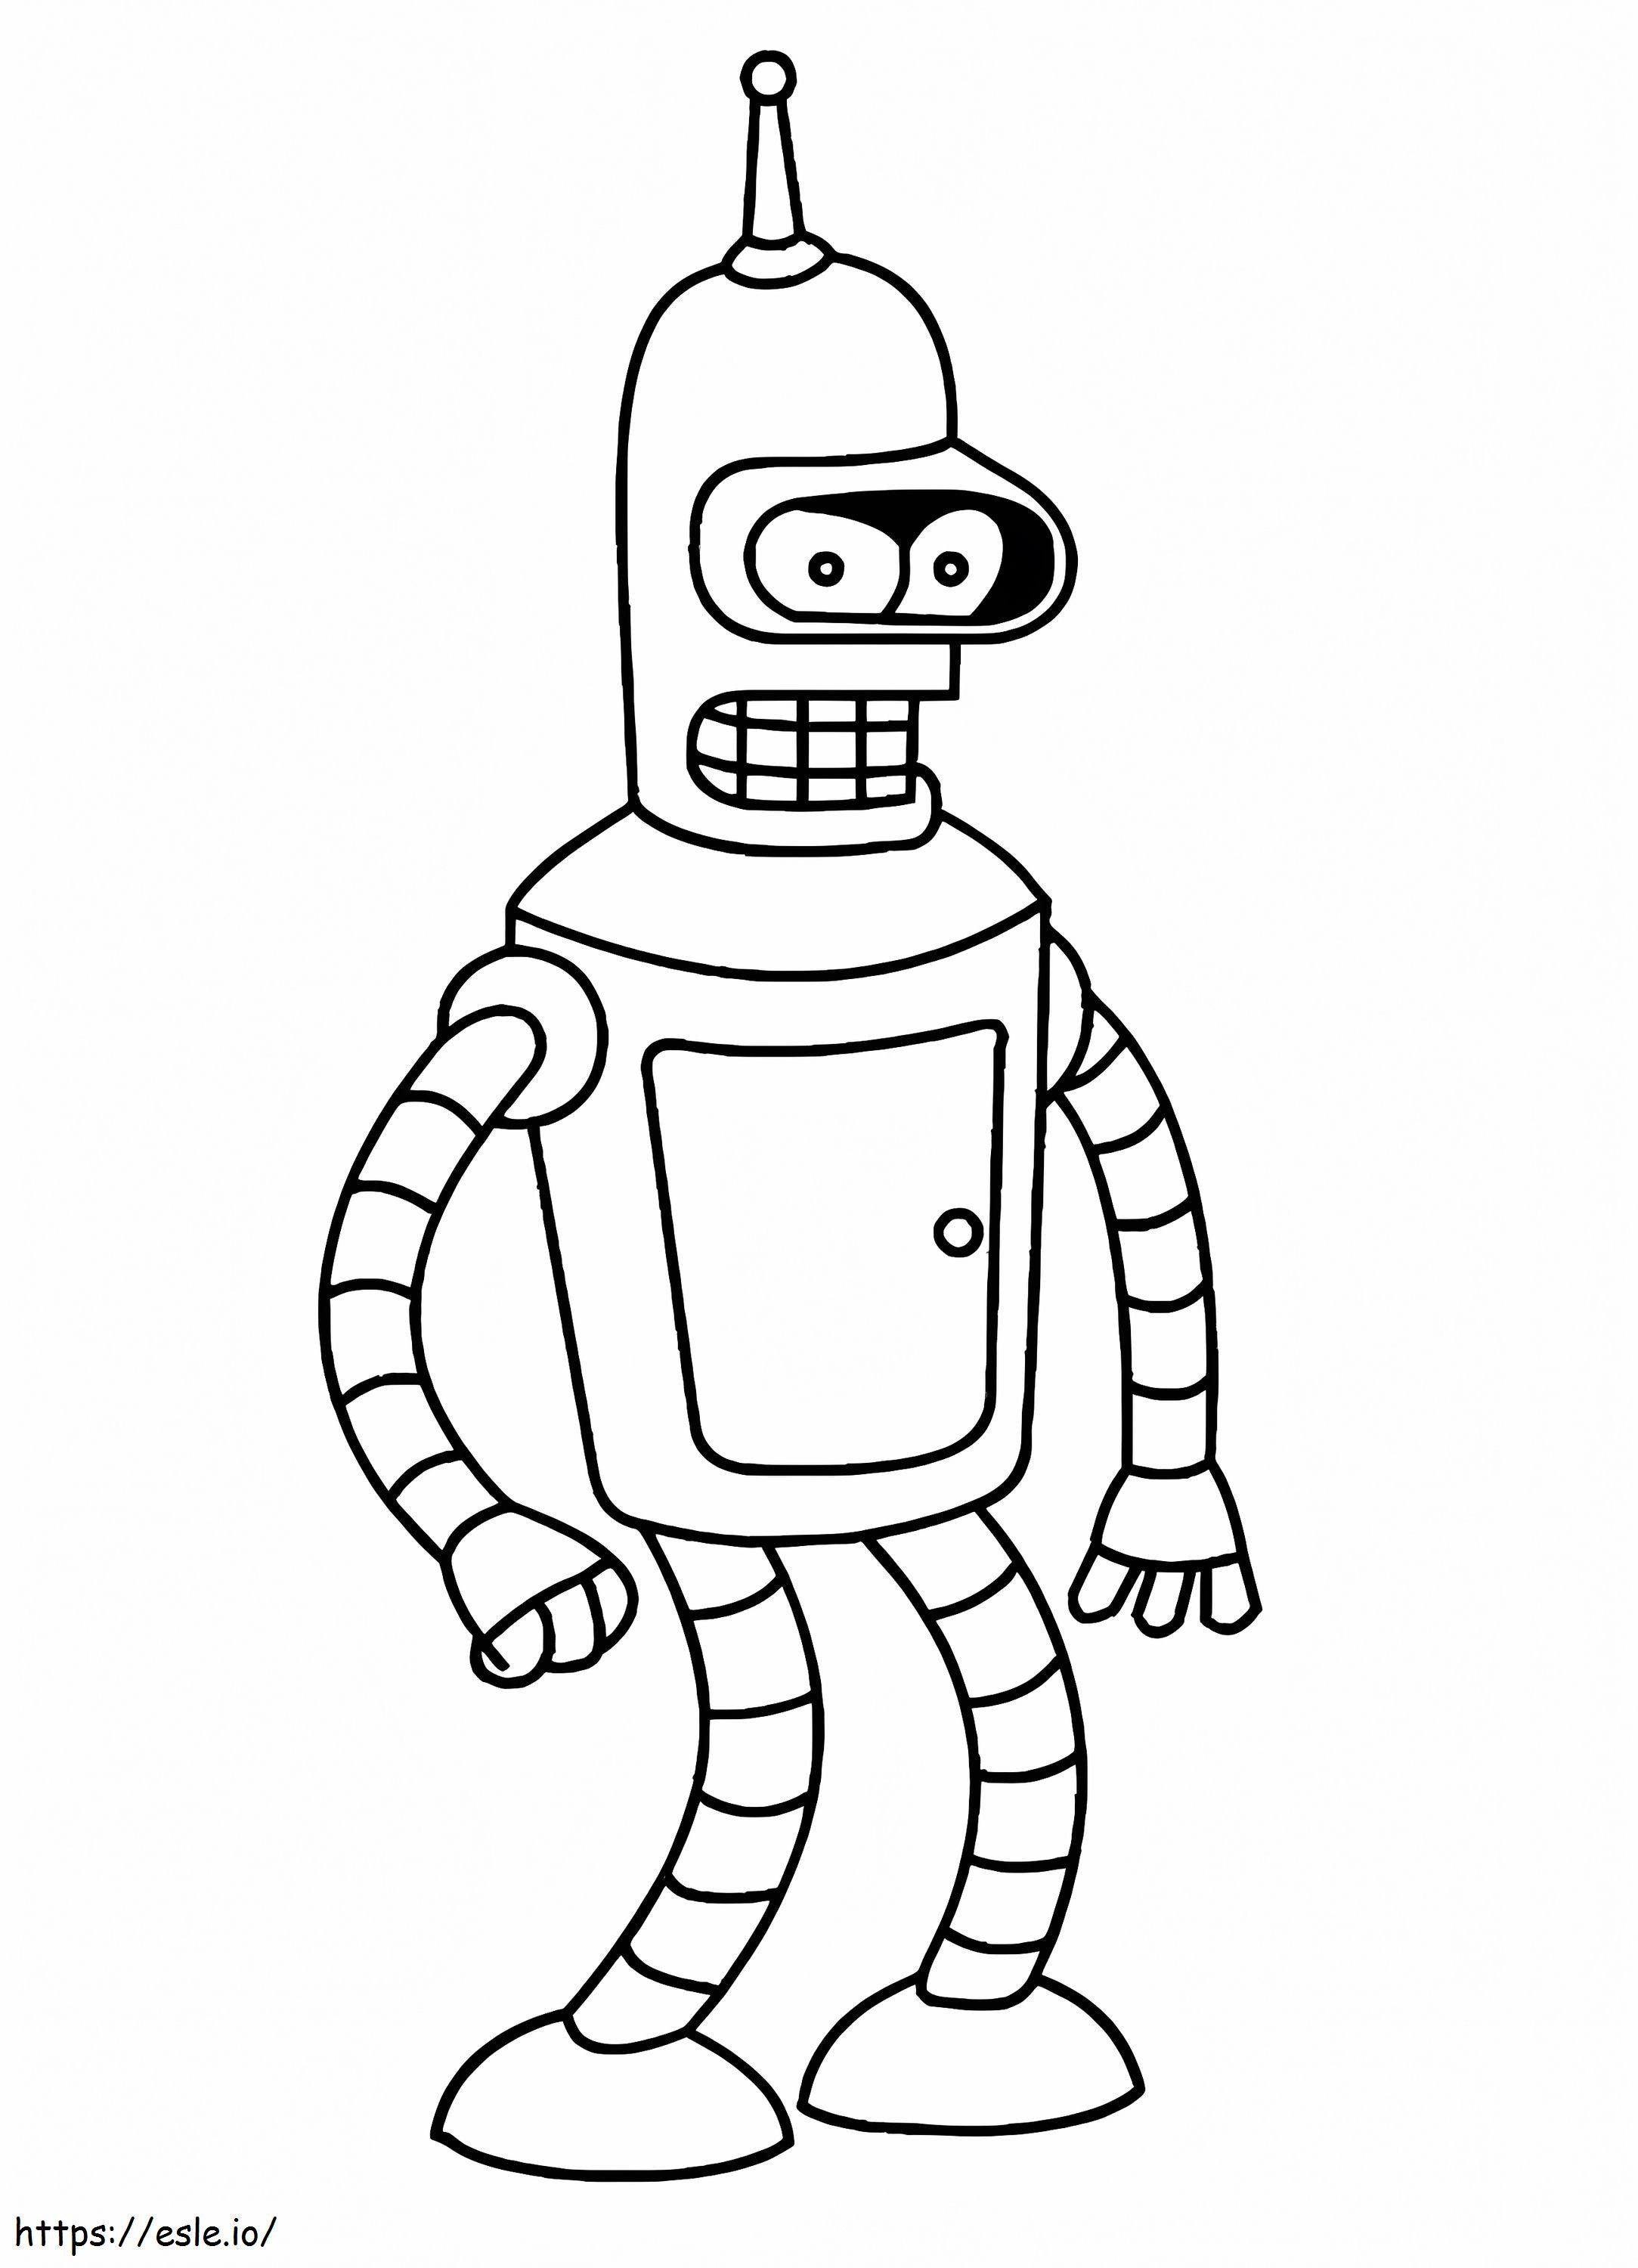 Bender coloring page